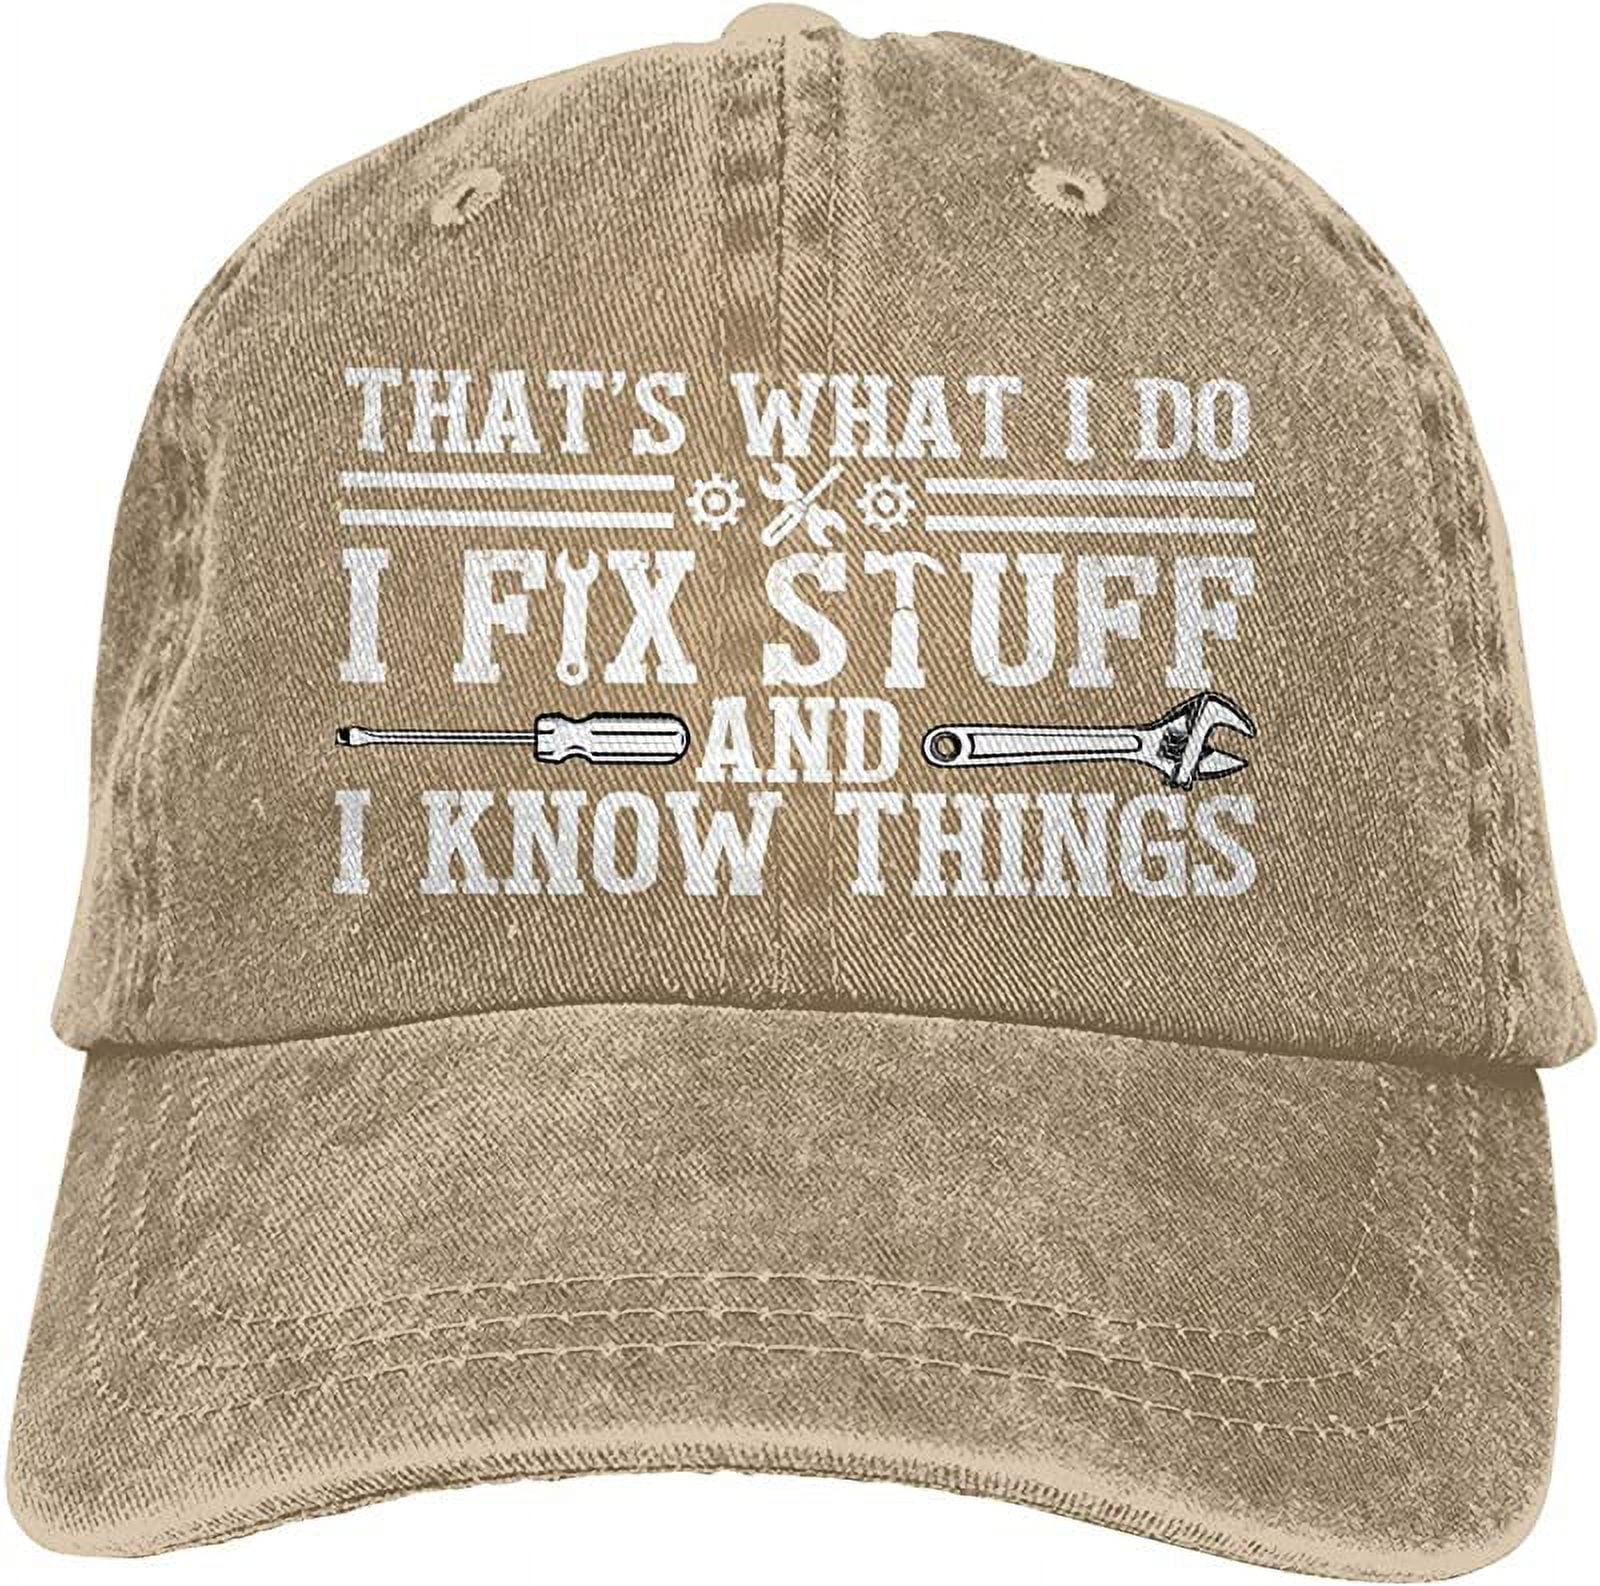 That's What I Do Womens Hat Funny Cap for Womens Gift